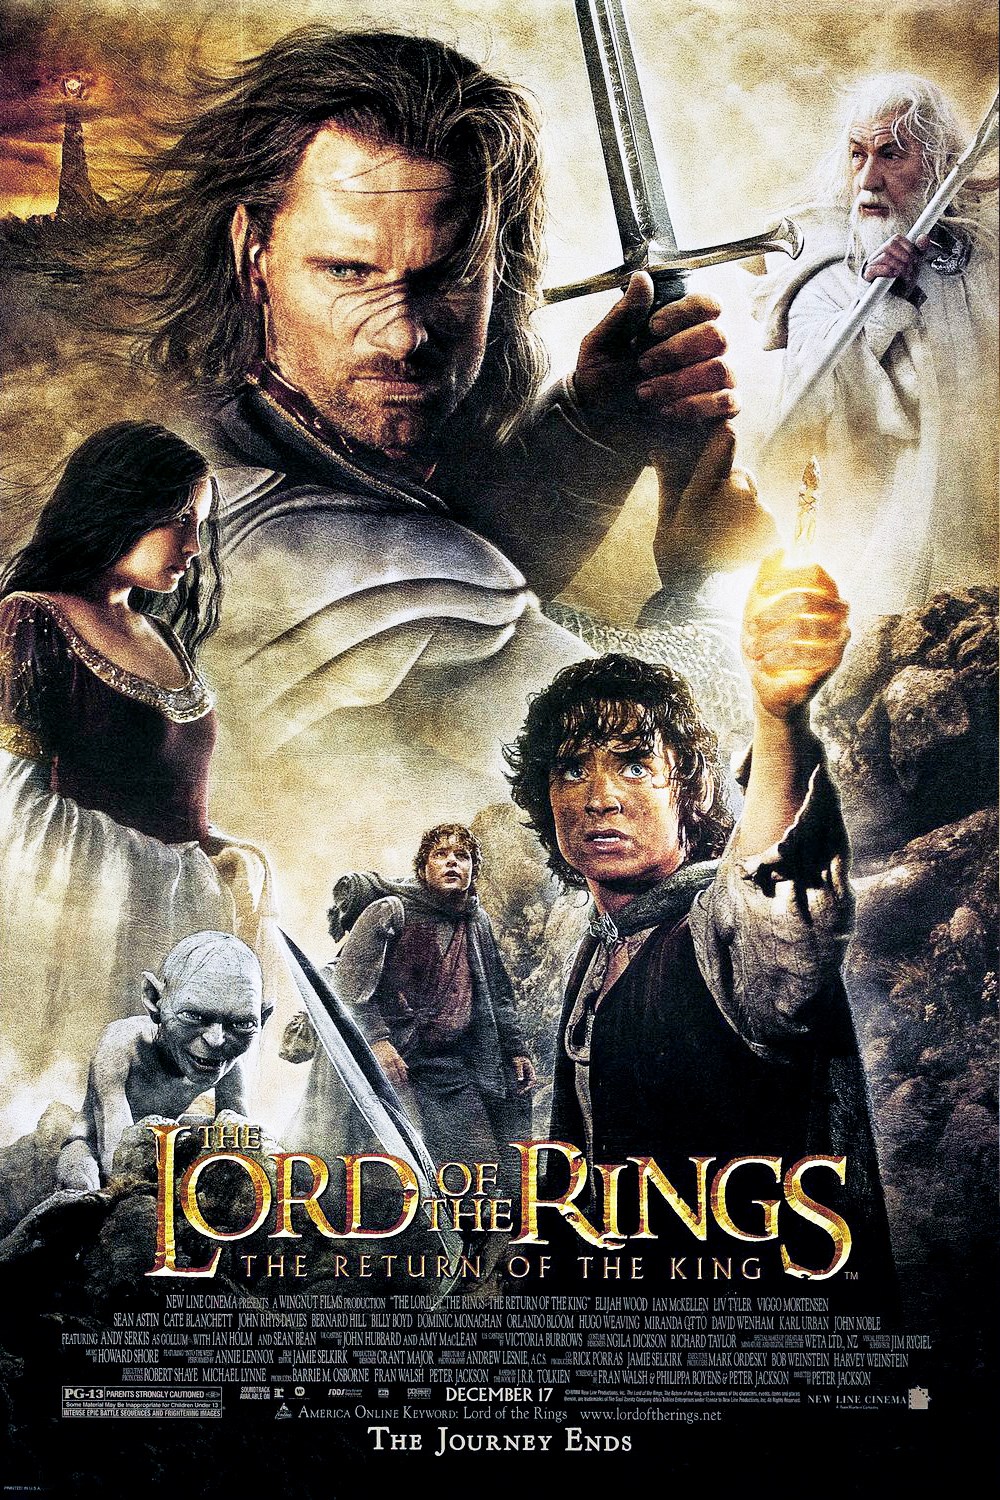 The Lord of the Rings: The Return of the King EXTENDED